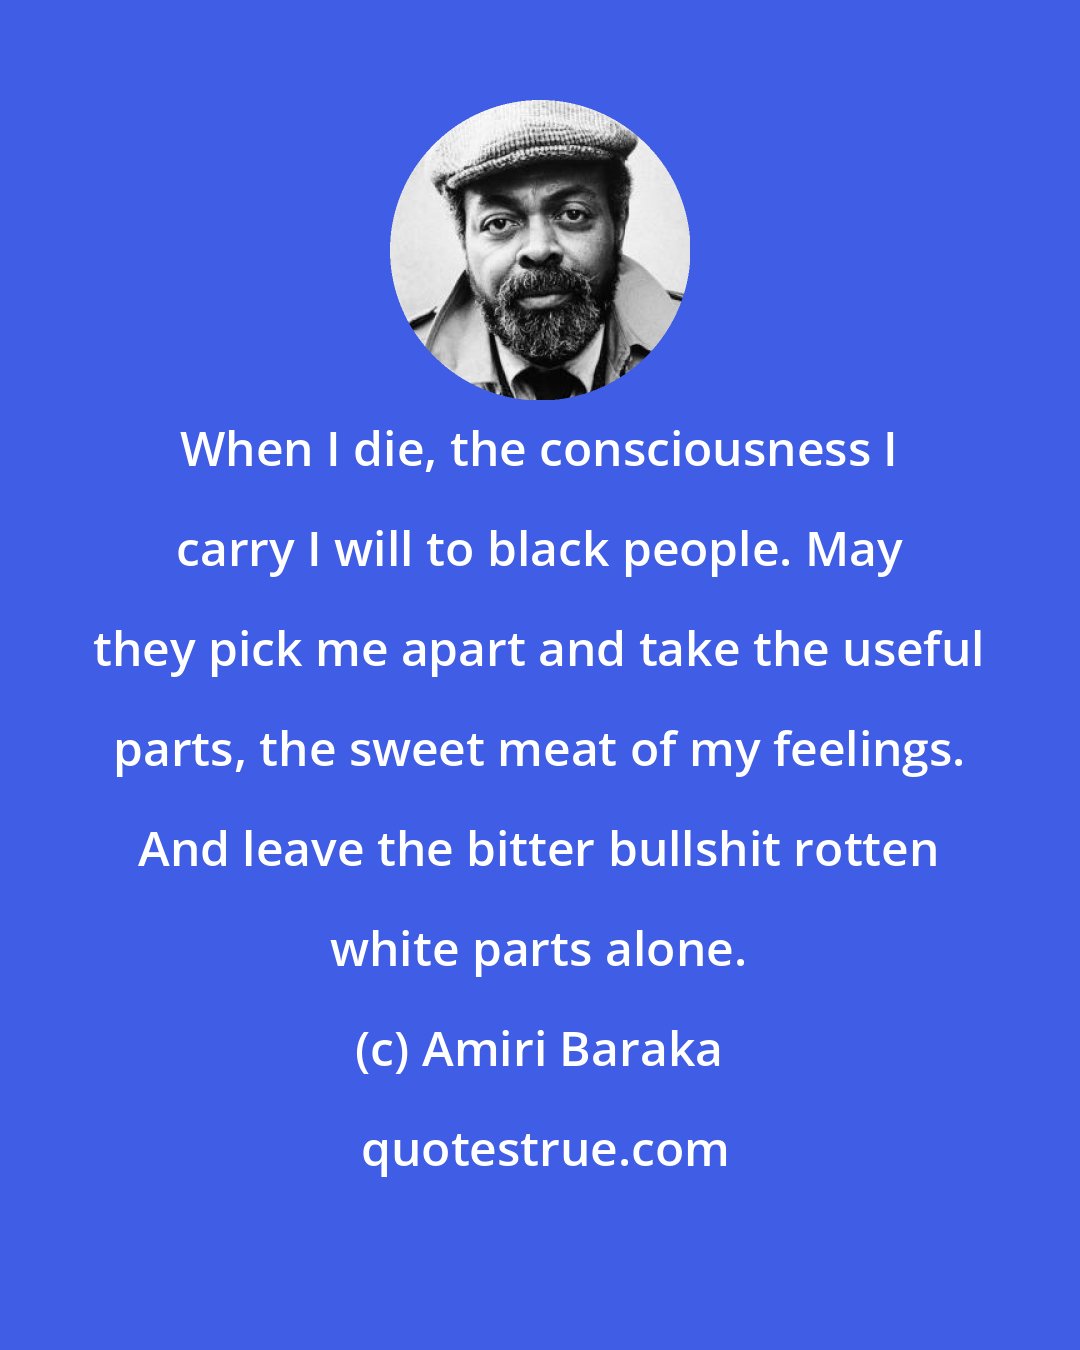 Amiri Baraka: When I die, the consciousness I carry I will to black people. May they pick me apart and take the useful parts, the sweet meat of my feelings. And leave the bitter bullshit rotten white parts alone.